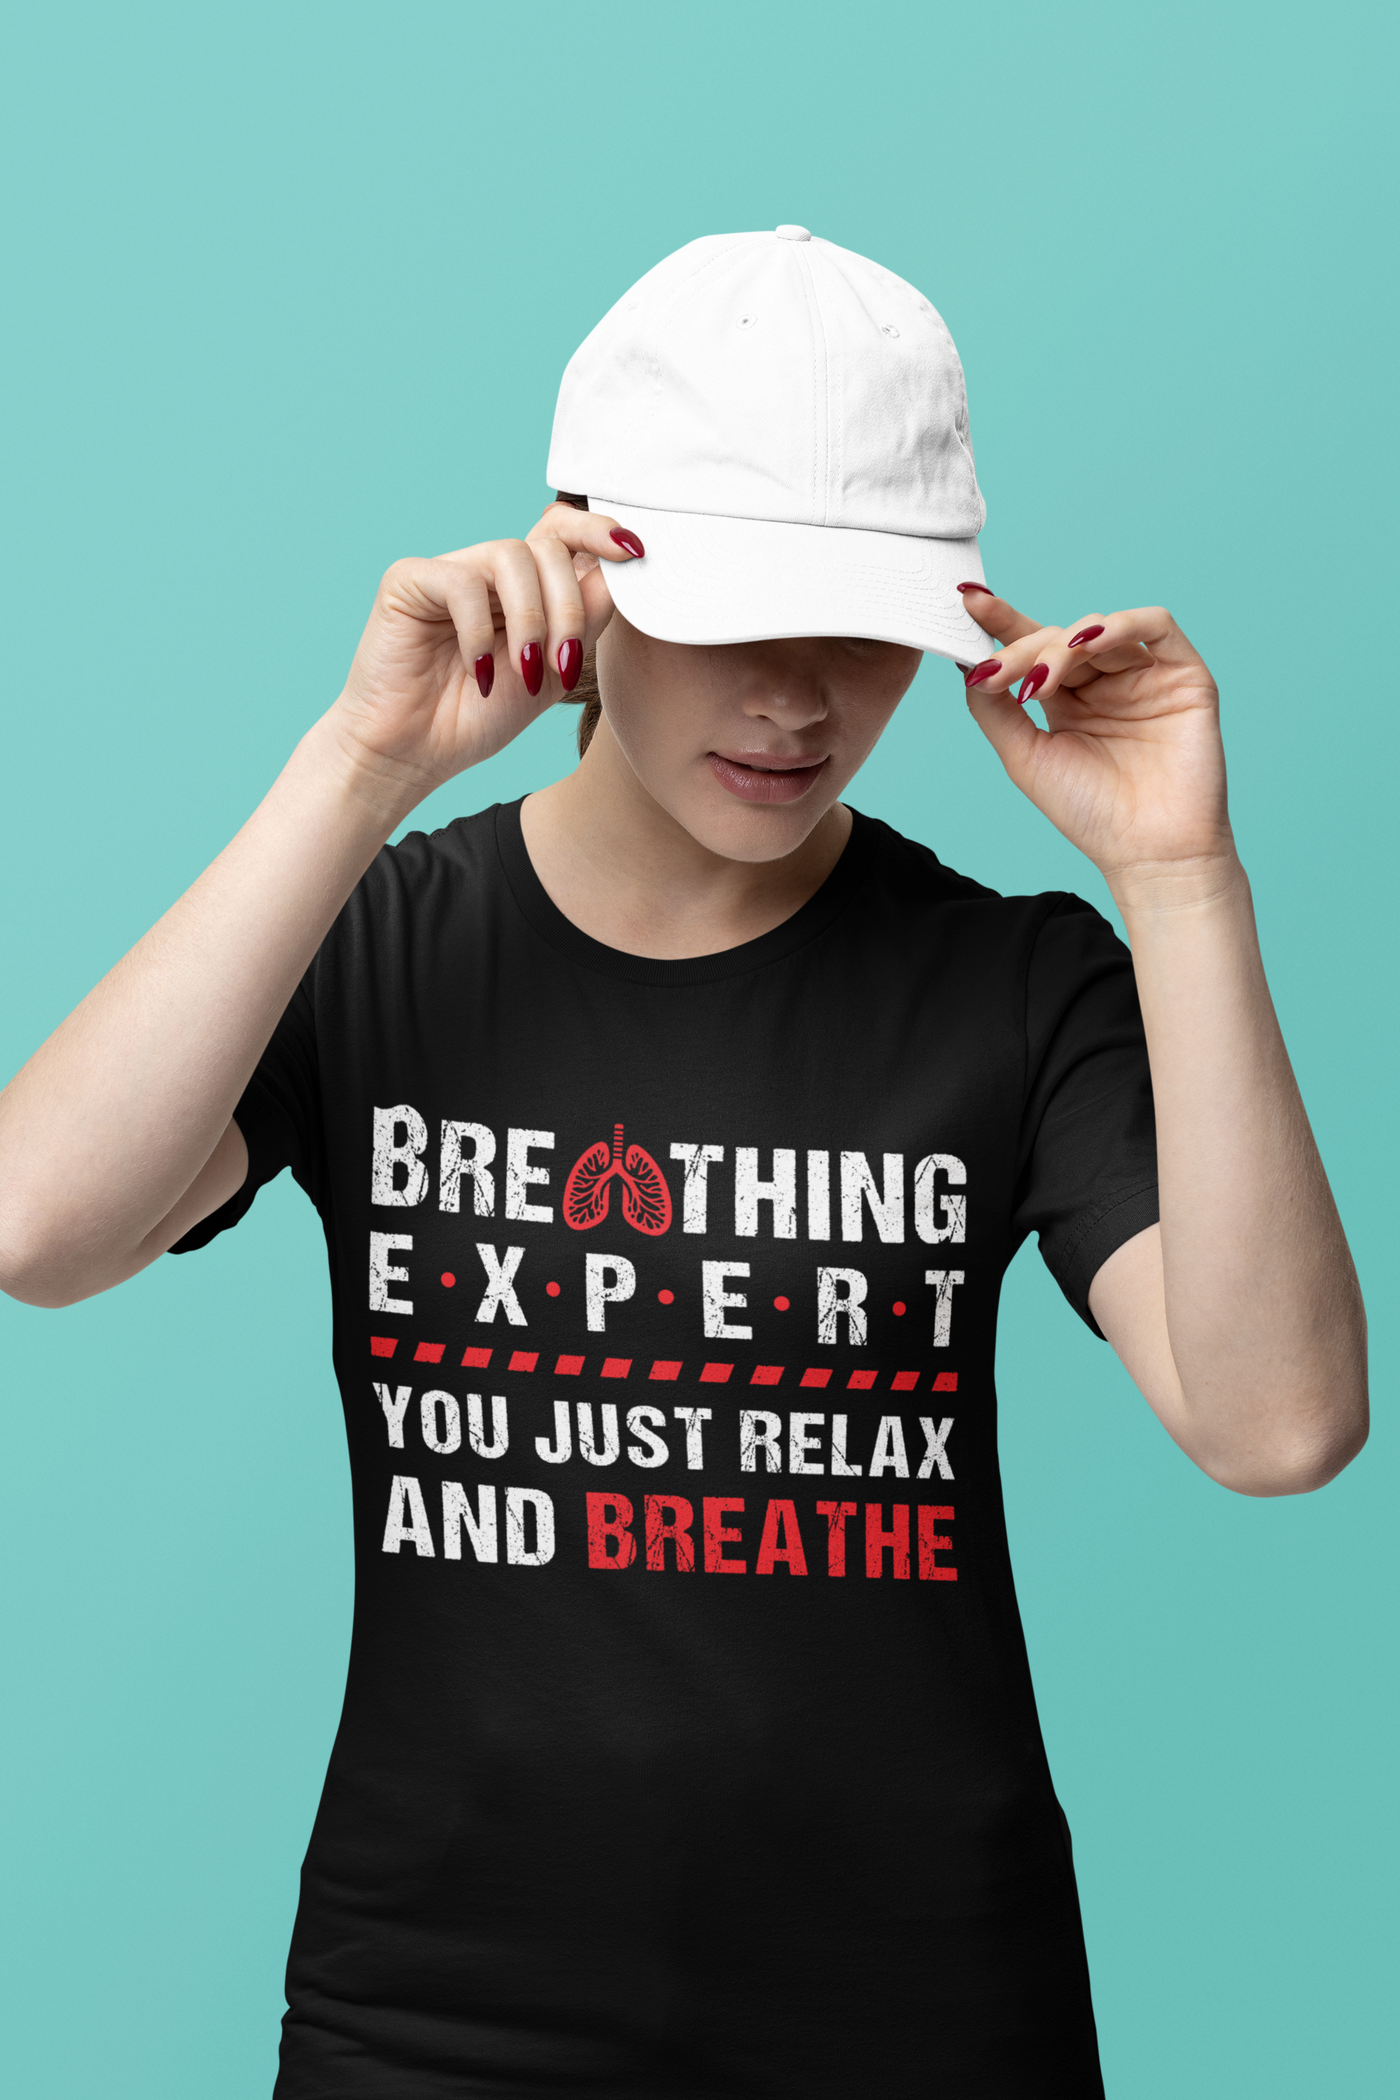 Respiratory Therapy - Breathing Expert, You Just Relax And Breathe